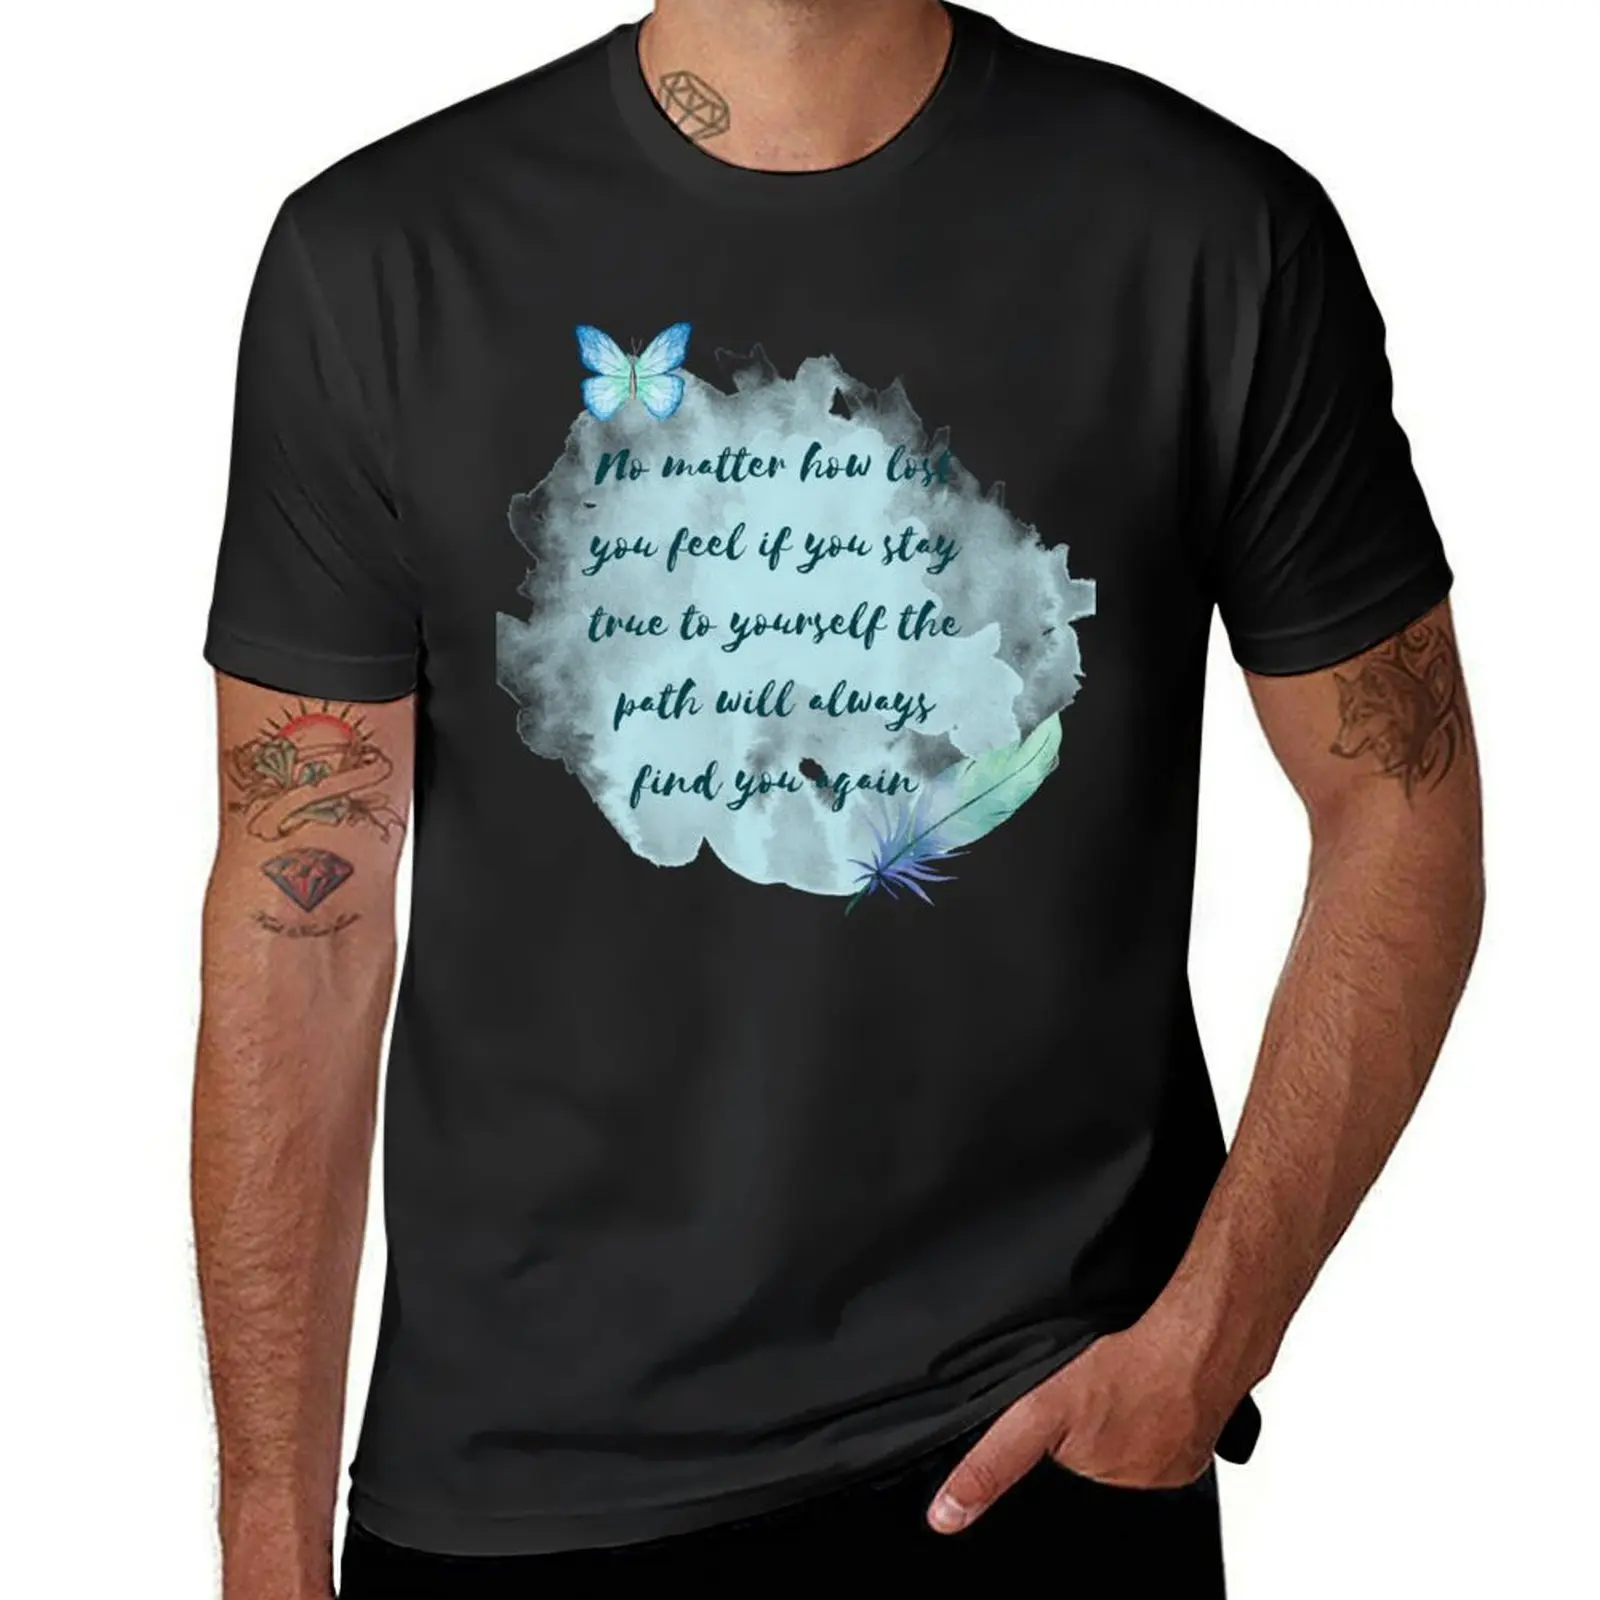 

The path will find you T-shirt cute tops sports fans shirts graphic tees cute clothes mens graphic t-shirts